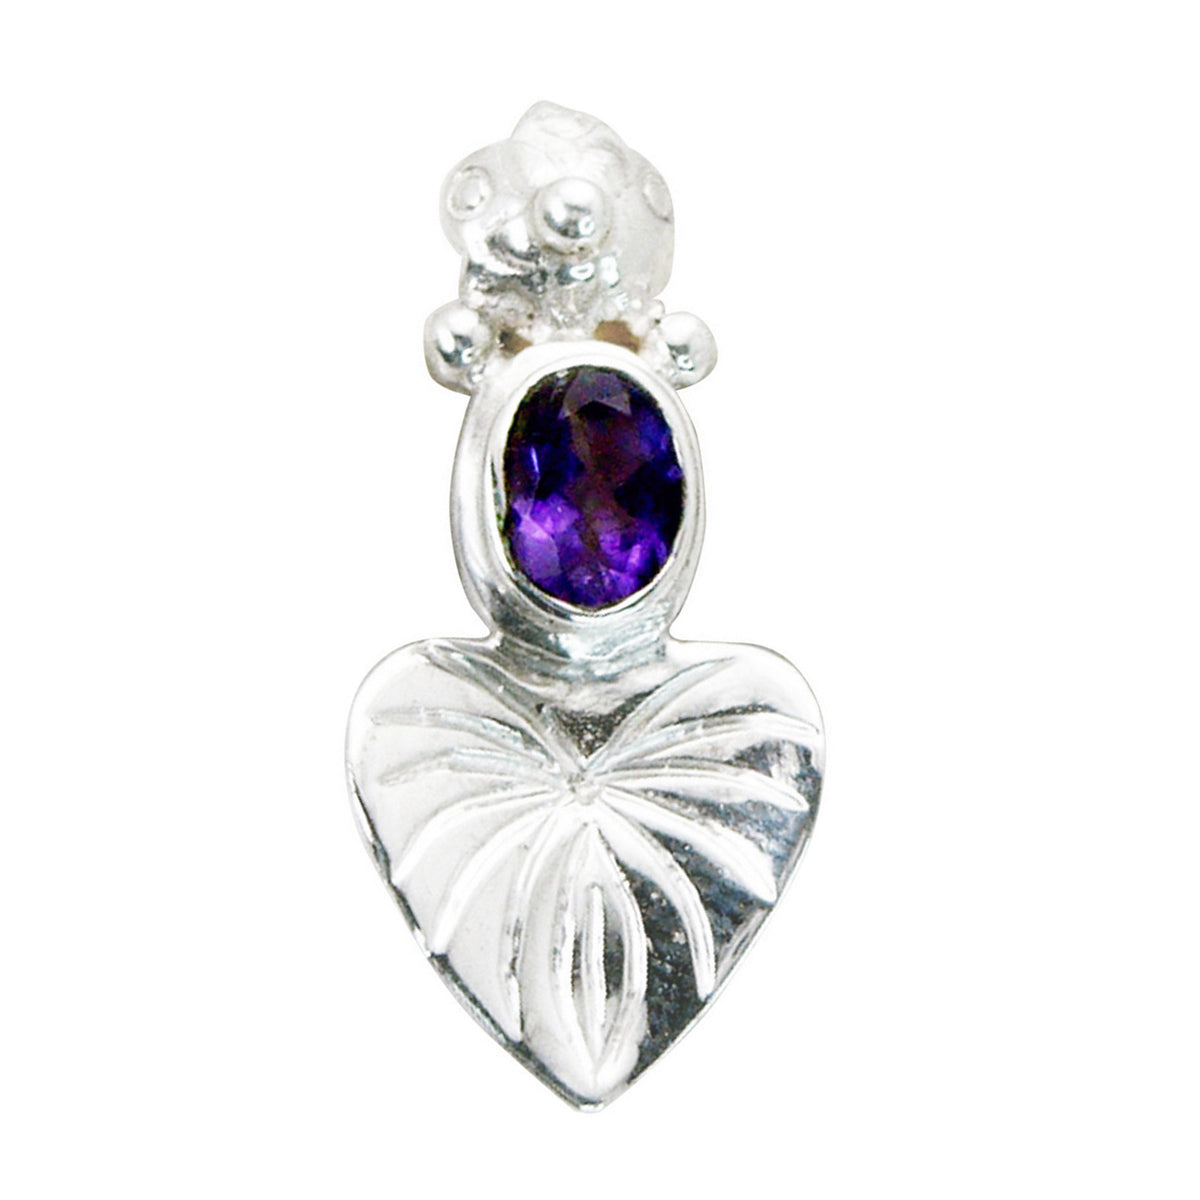 Riyo Heavenly Gems Oval Faceted Purple Amethyst Solid Silver Pendant Gift For Anniversary